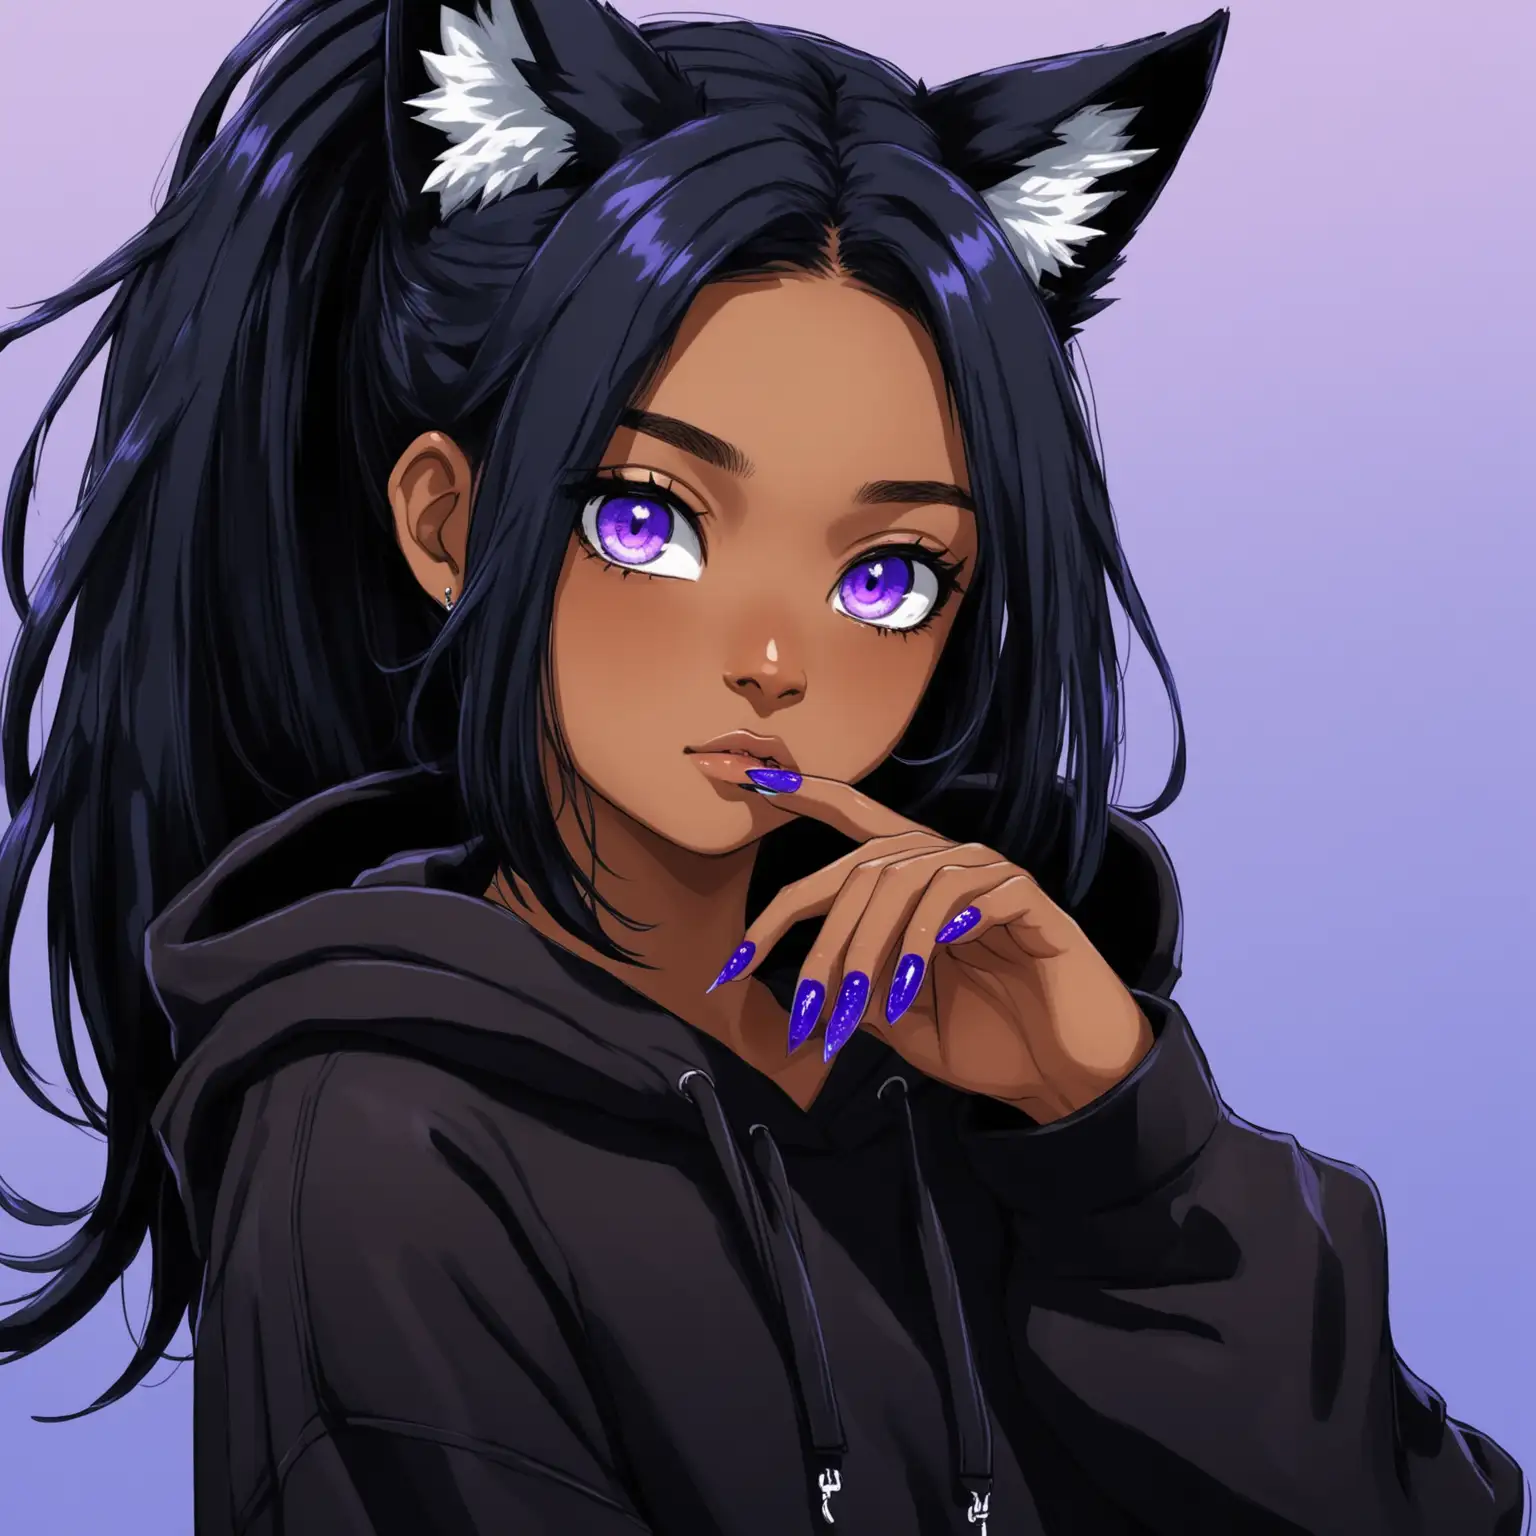 Teenage Girl with Wolf Ears in Black Hoodie and Long Blue Nails